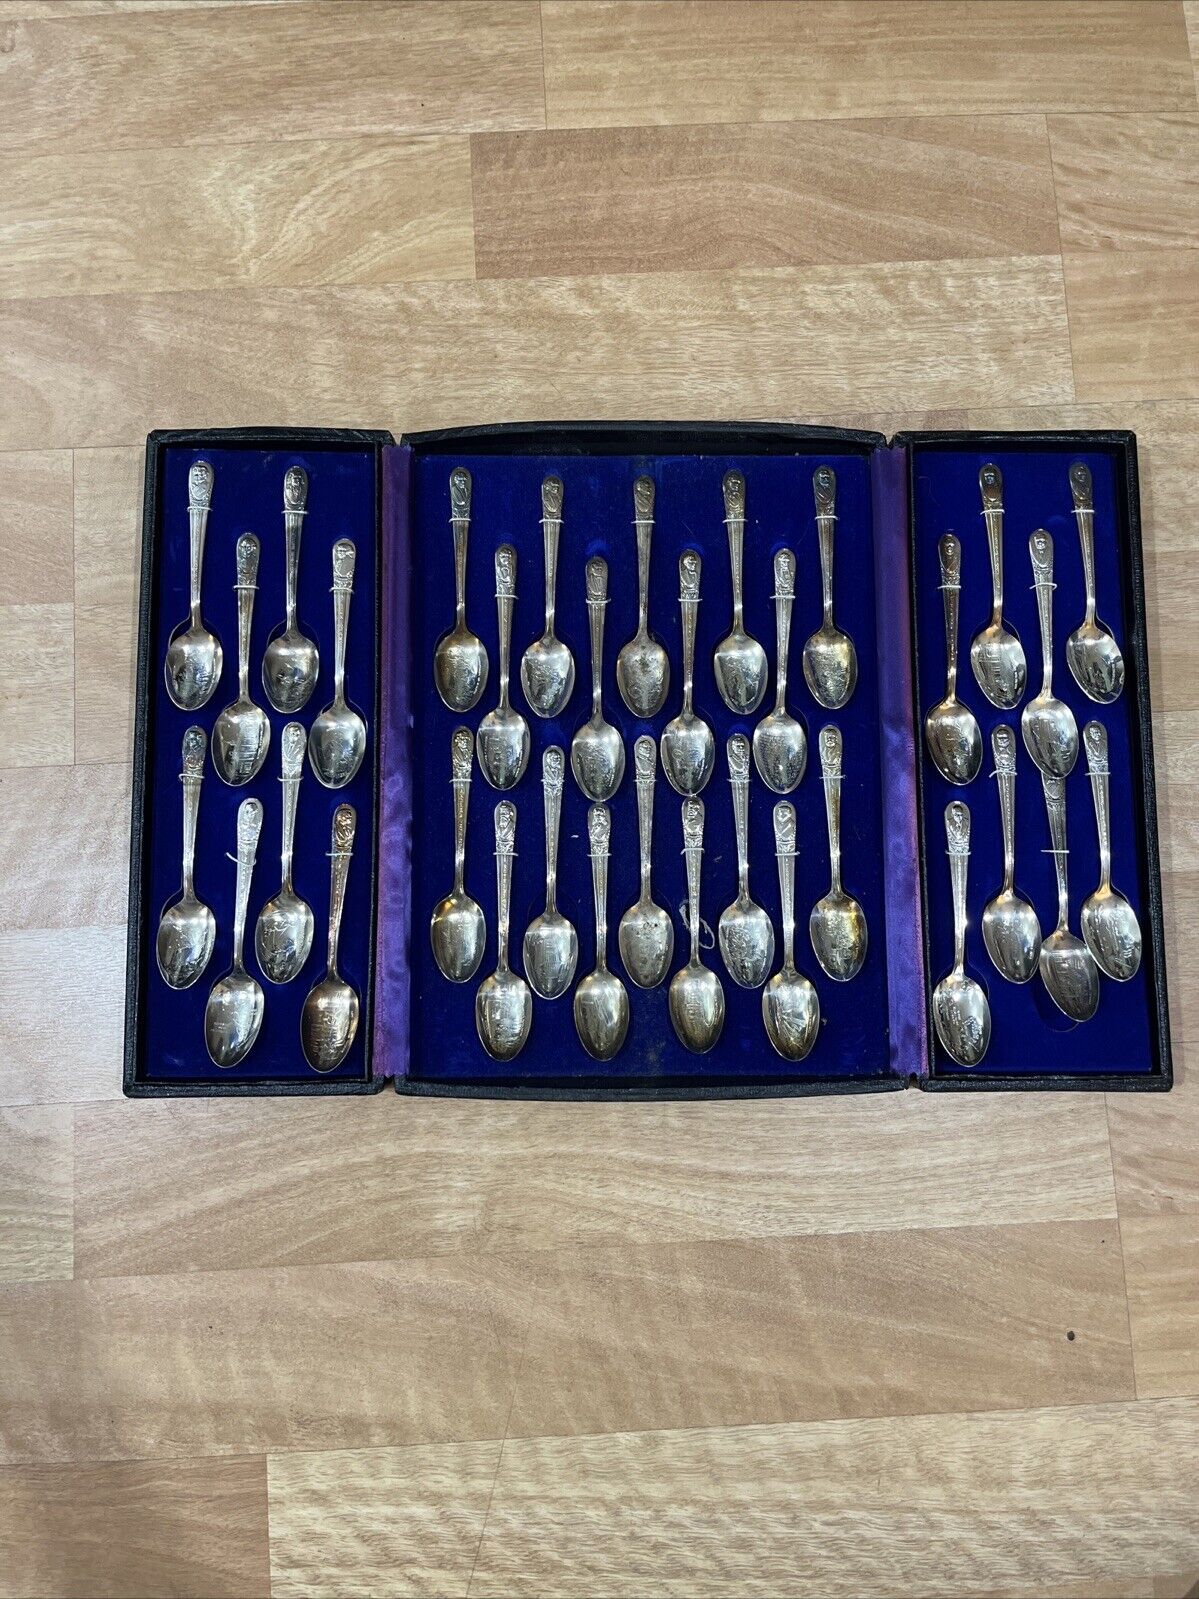 VTG PresidentIal Commemorative Spoon Collection in Case - 34 Spoons, Wm. Rogers